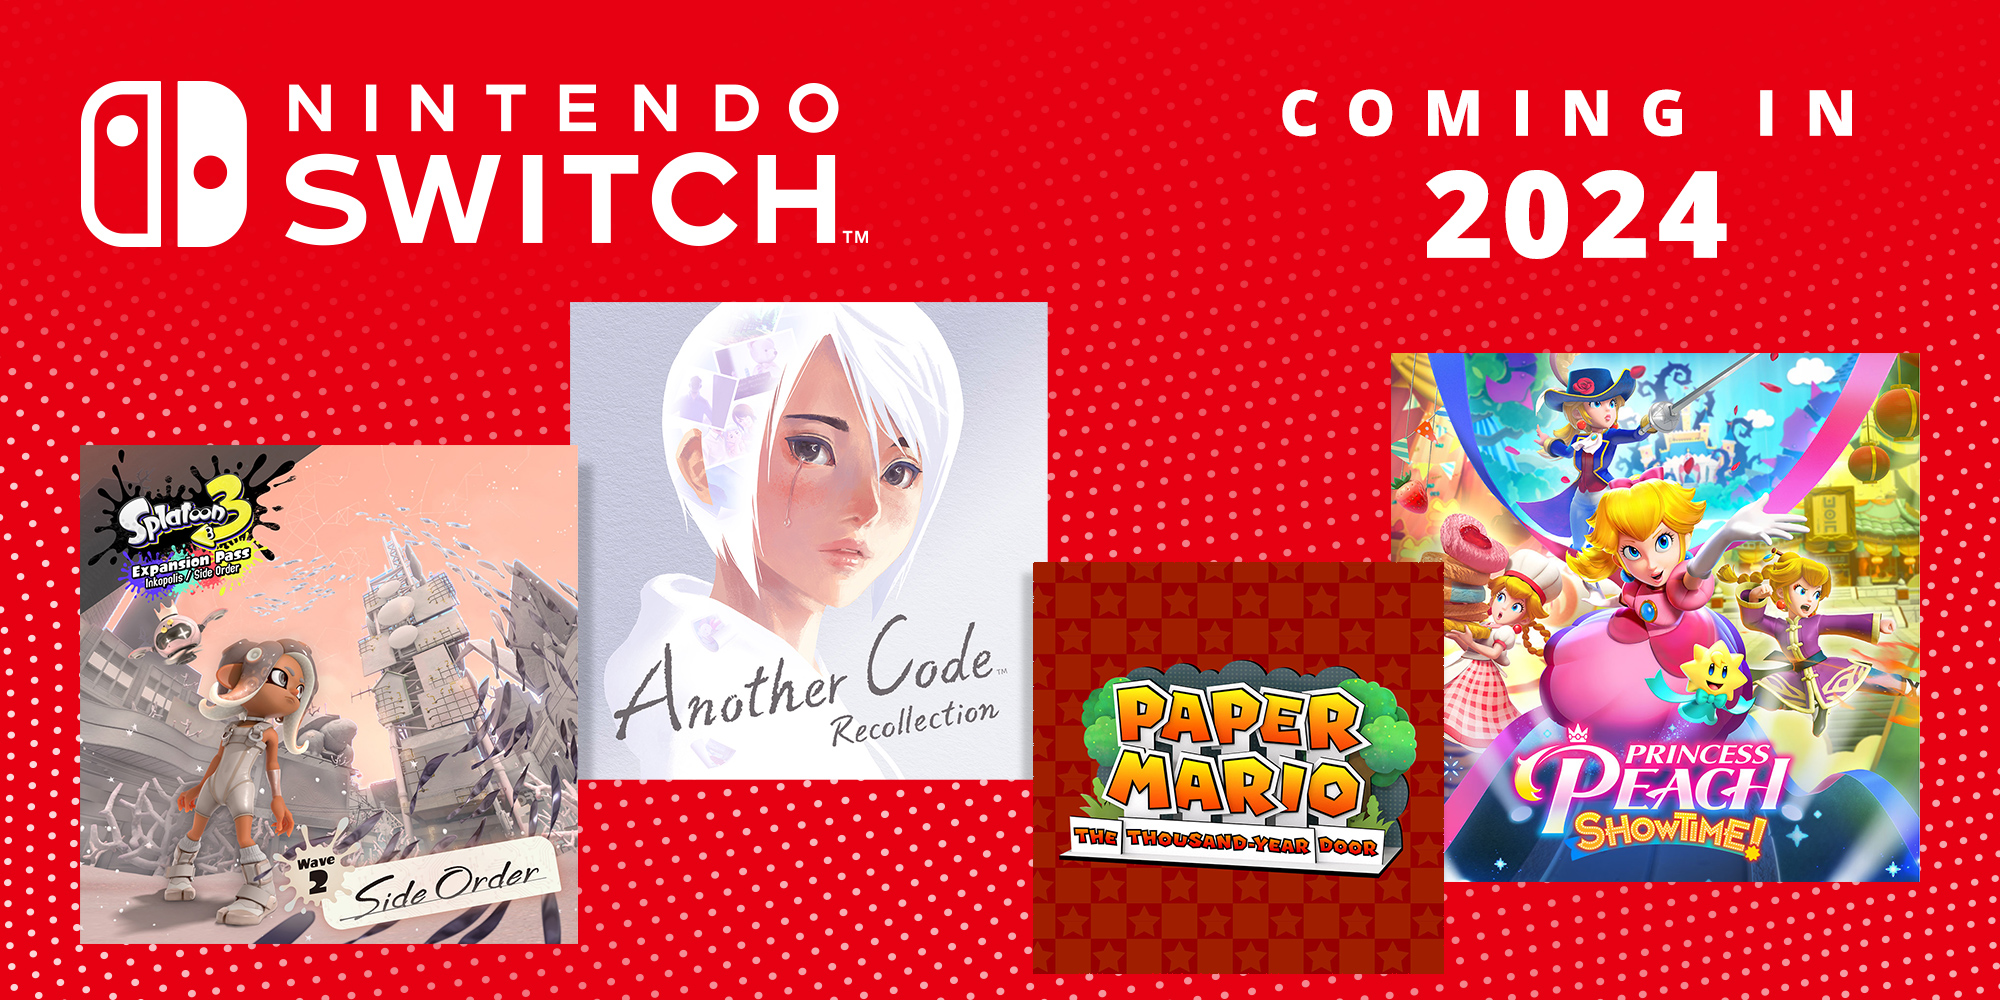 Nintendo Switch new games for 2024: Paper Mario, Peach, more